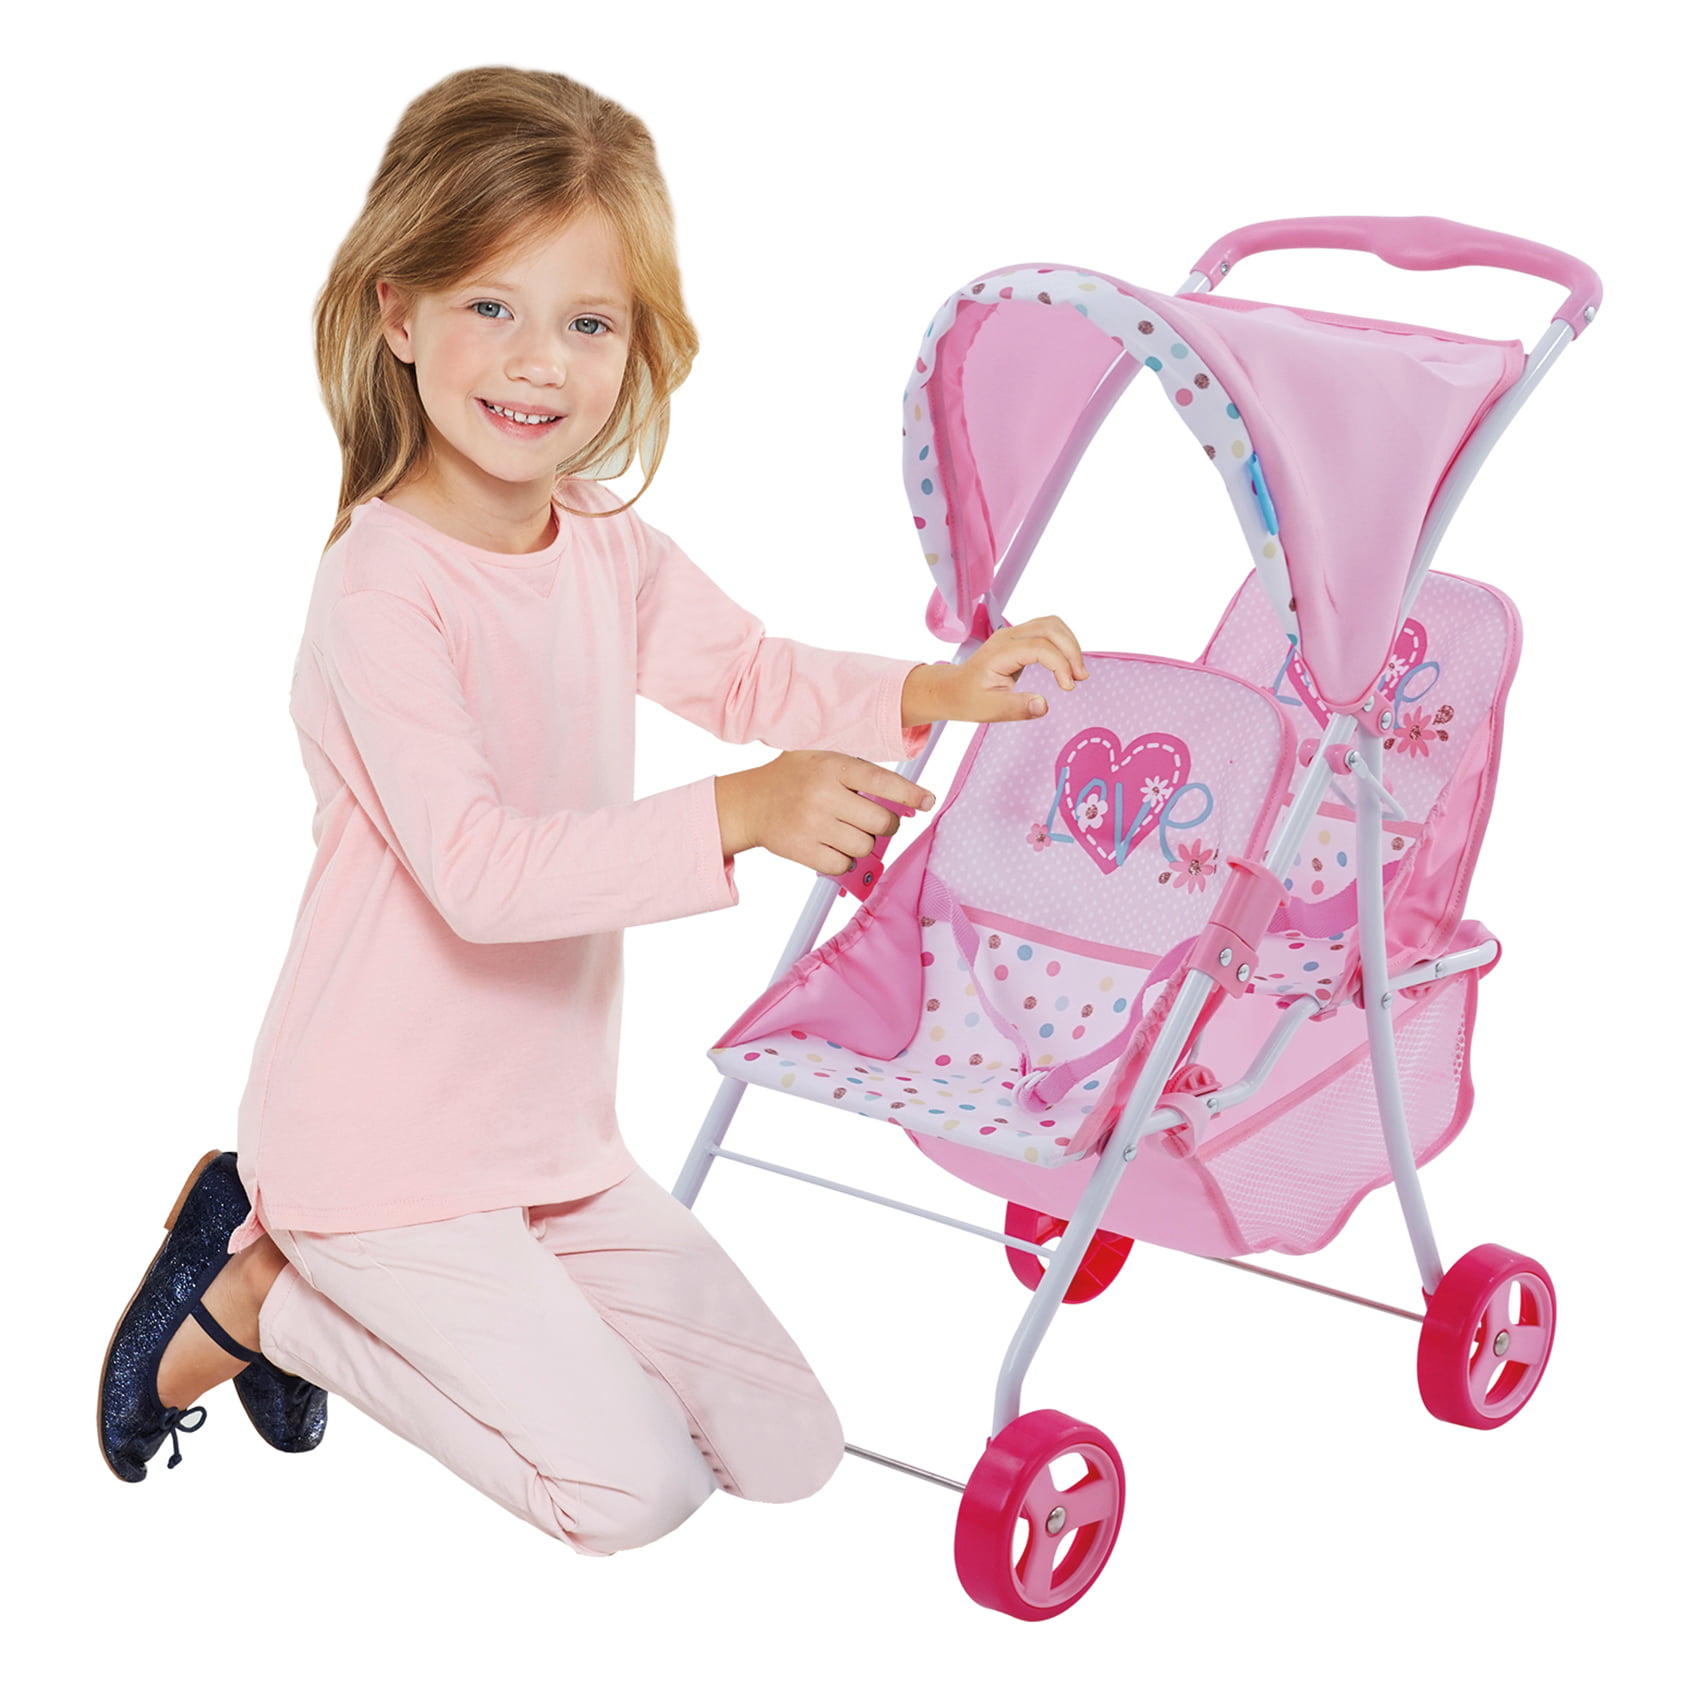 play strollers for baby dolls